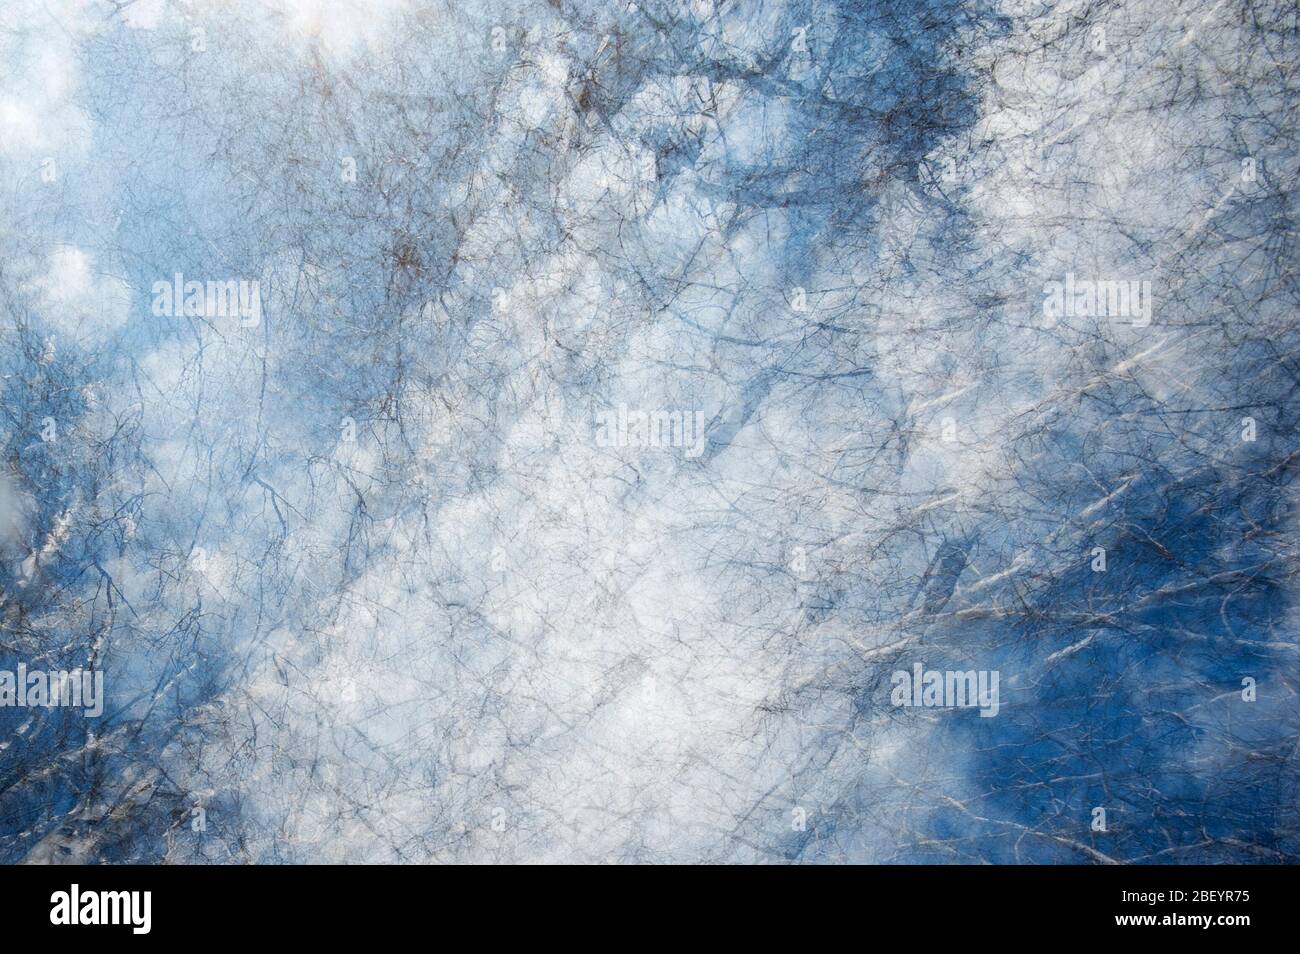 In-camera multi exposure of clouds, sky and tree branches to create a pattern and a mood, Stock Photo